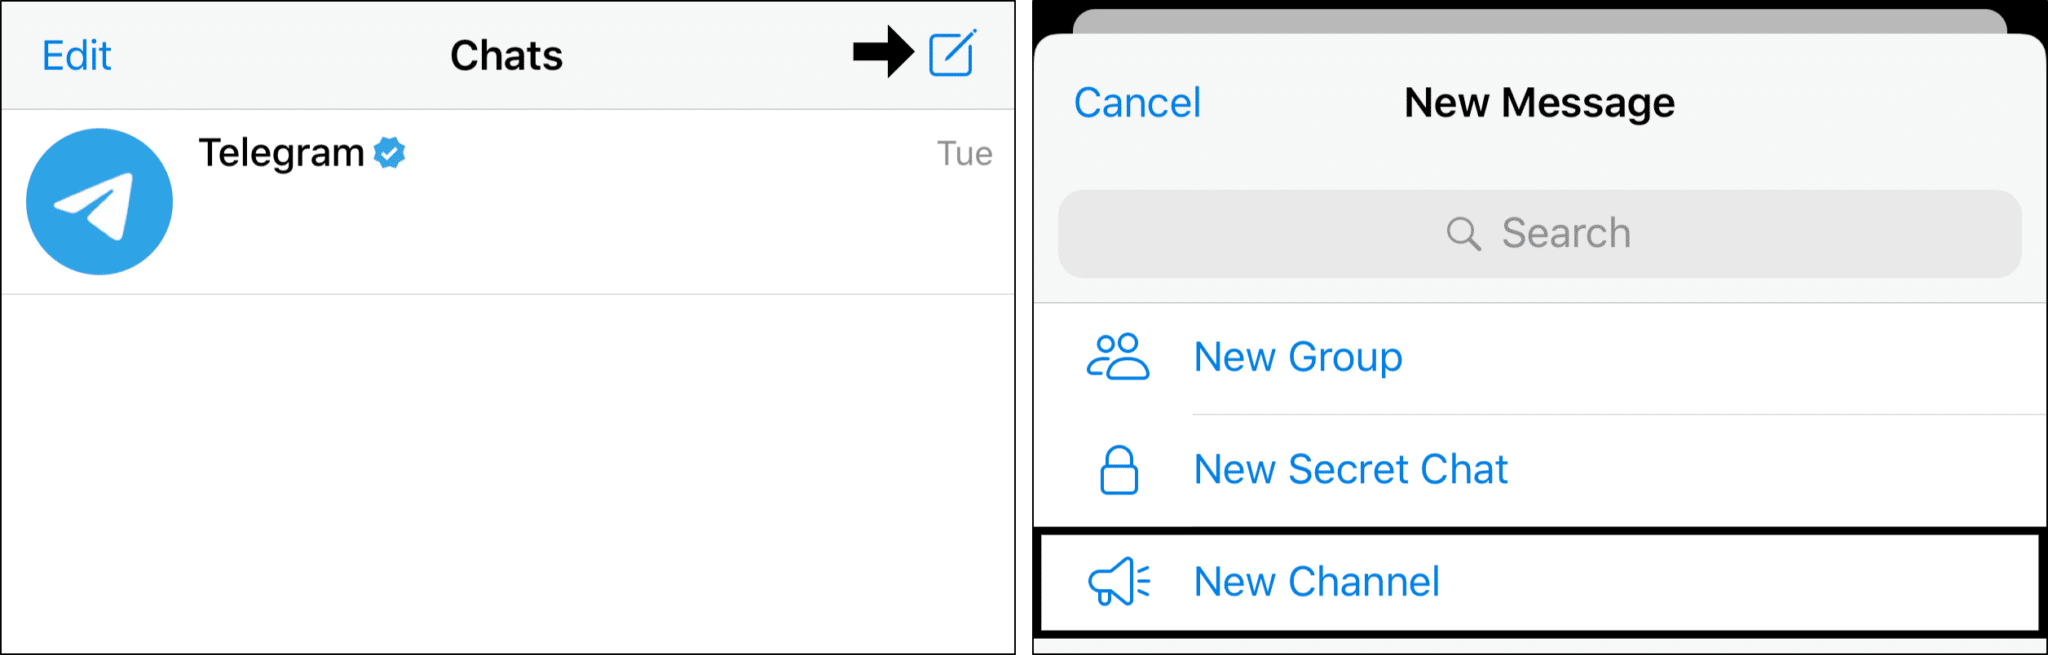 create channels to send messages to yourself on telegram on iPhone, iPad and Android